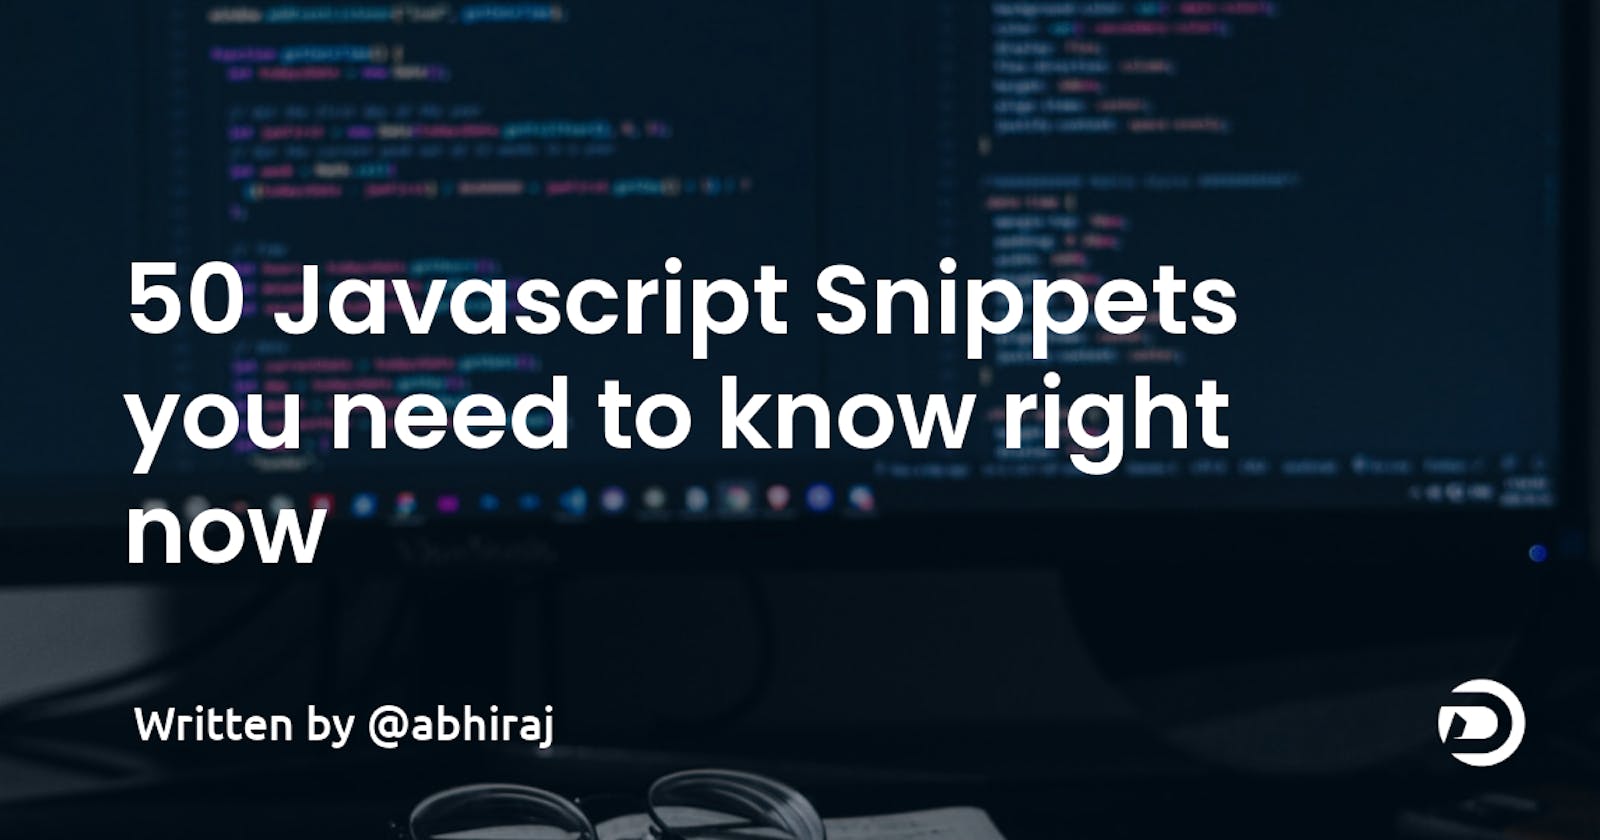 50 Javascript Snippets you need to know right now